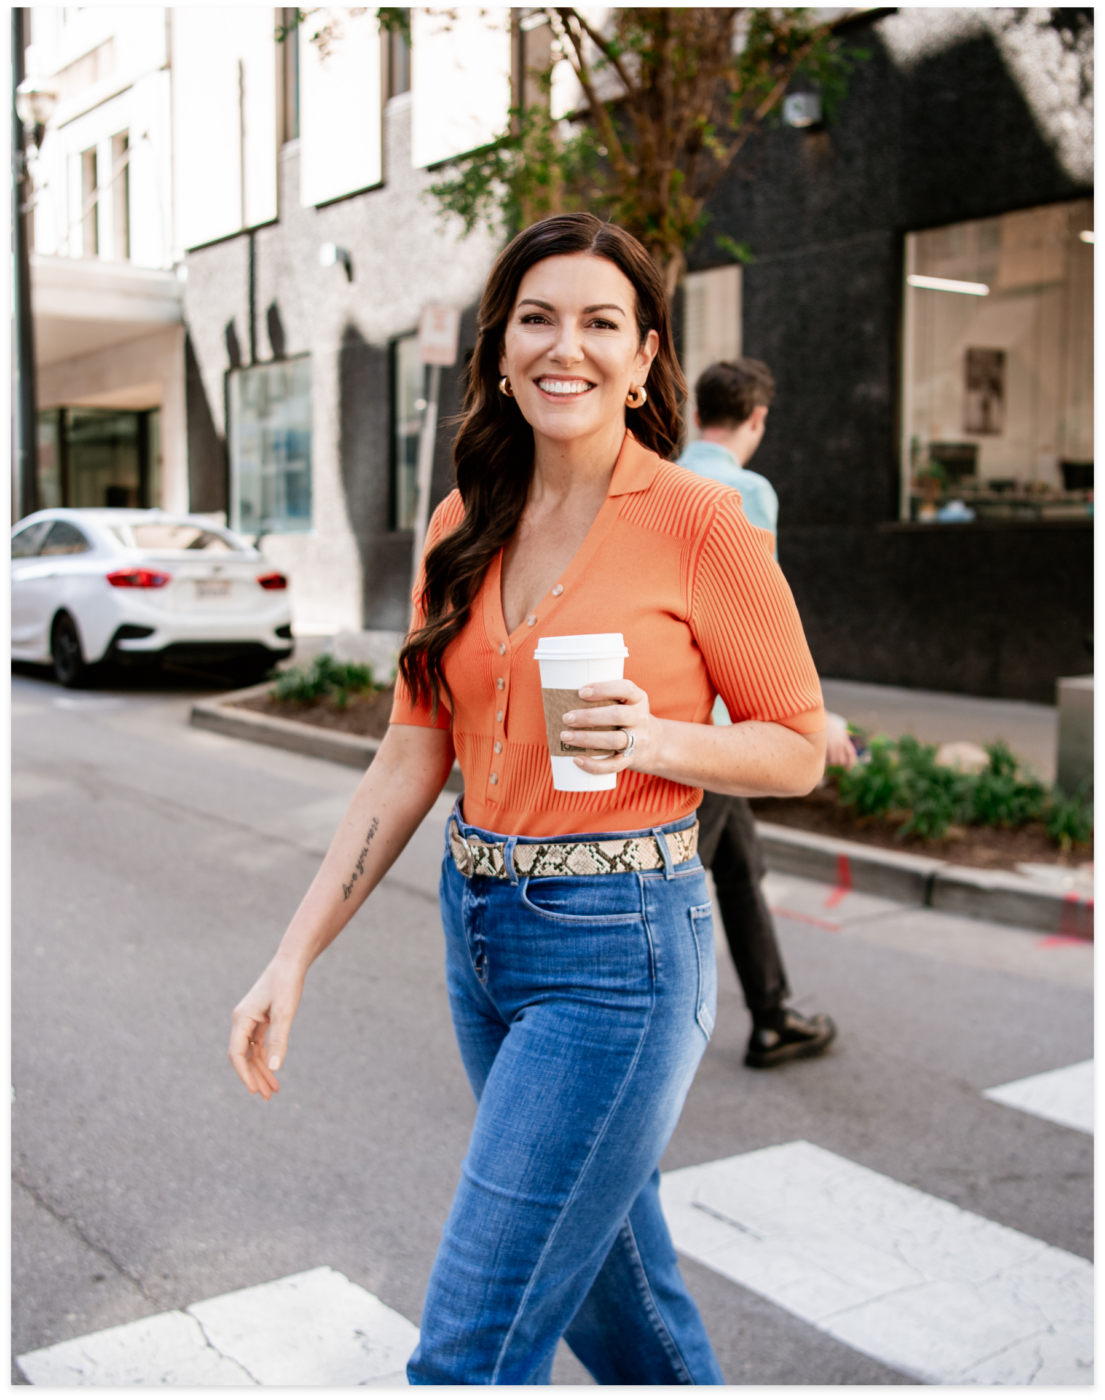 amy porterfield walking in the street with a cup of coffee